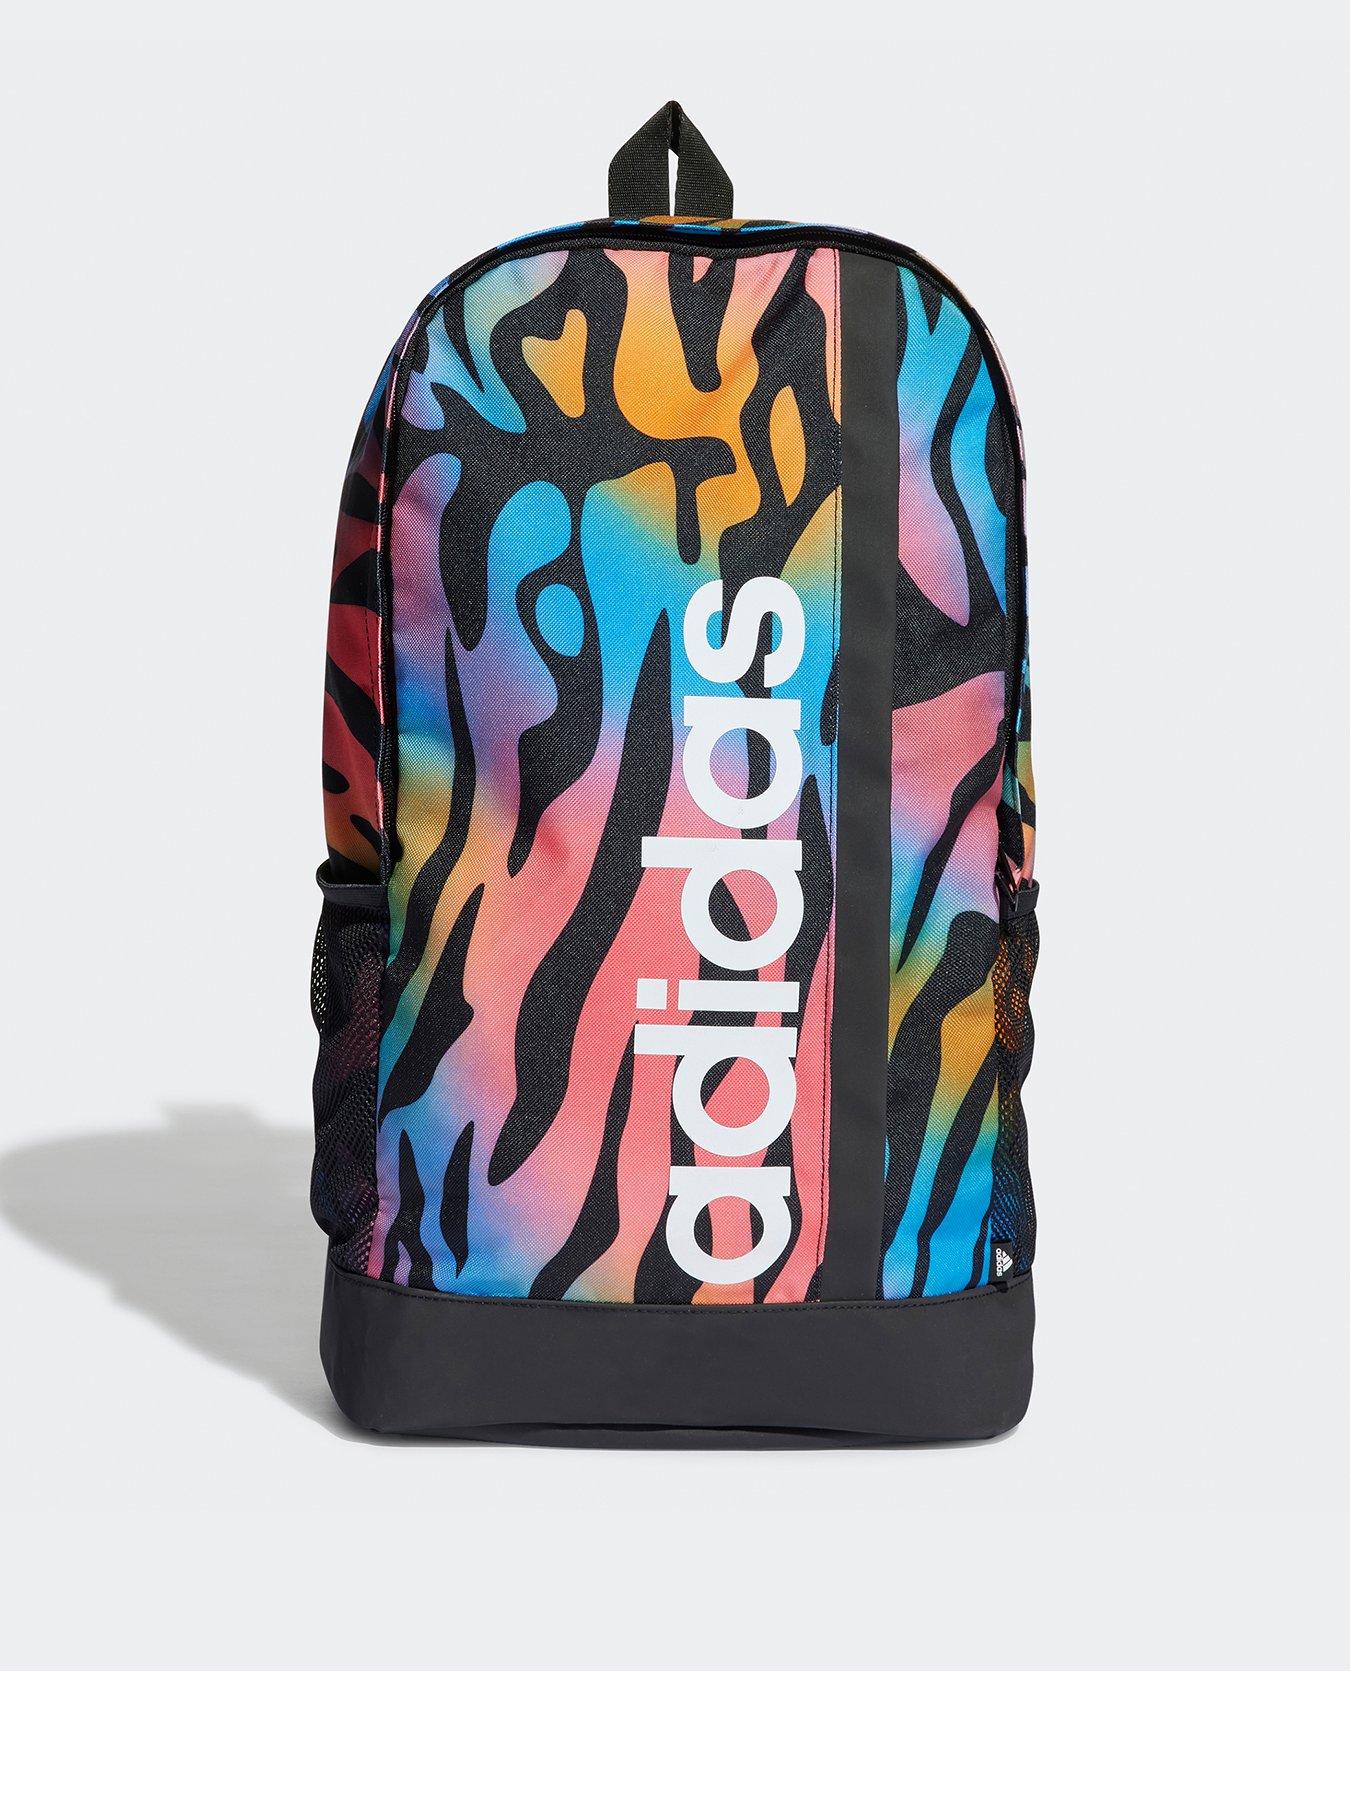  Tailored For Her Graphic Backpack